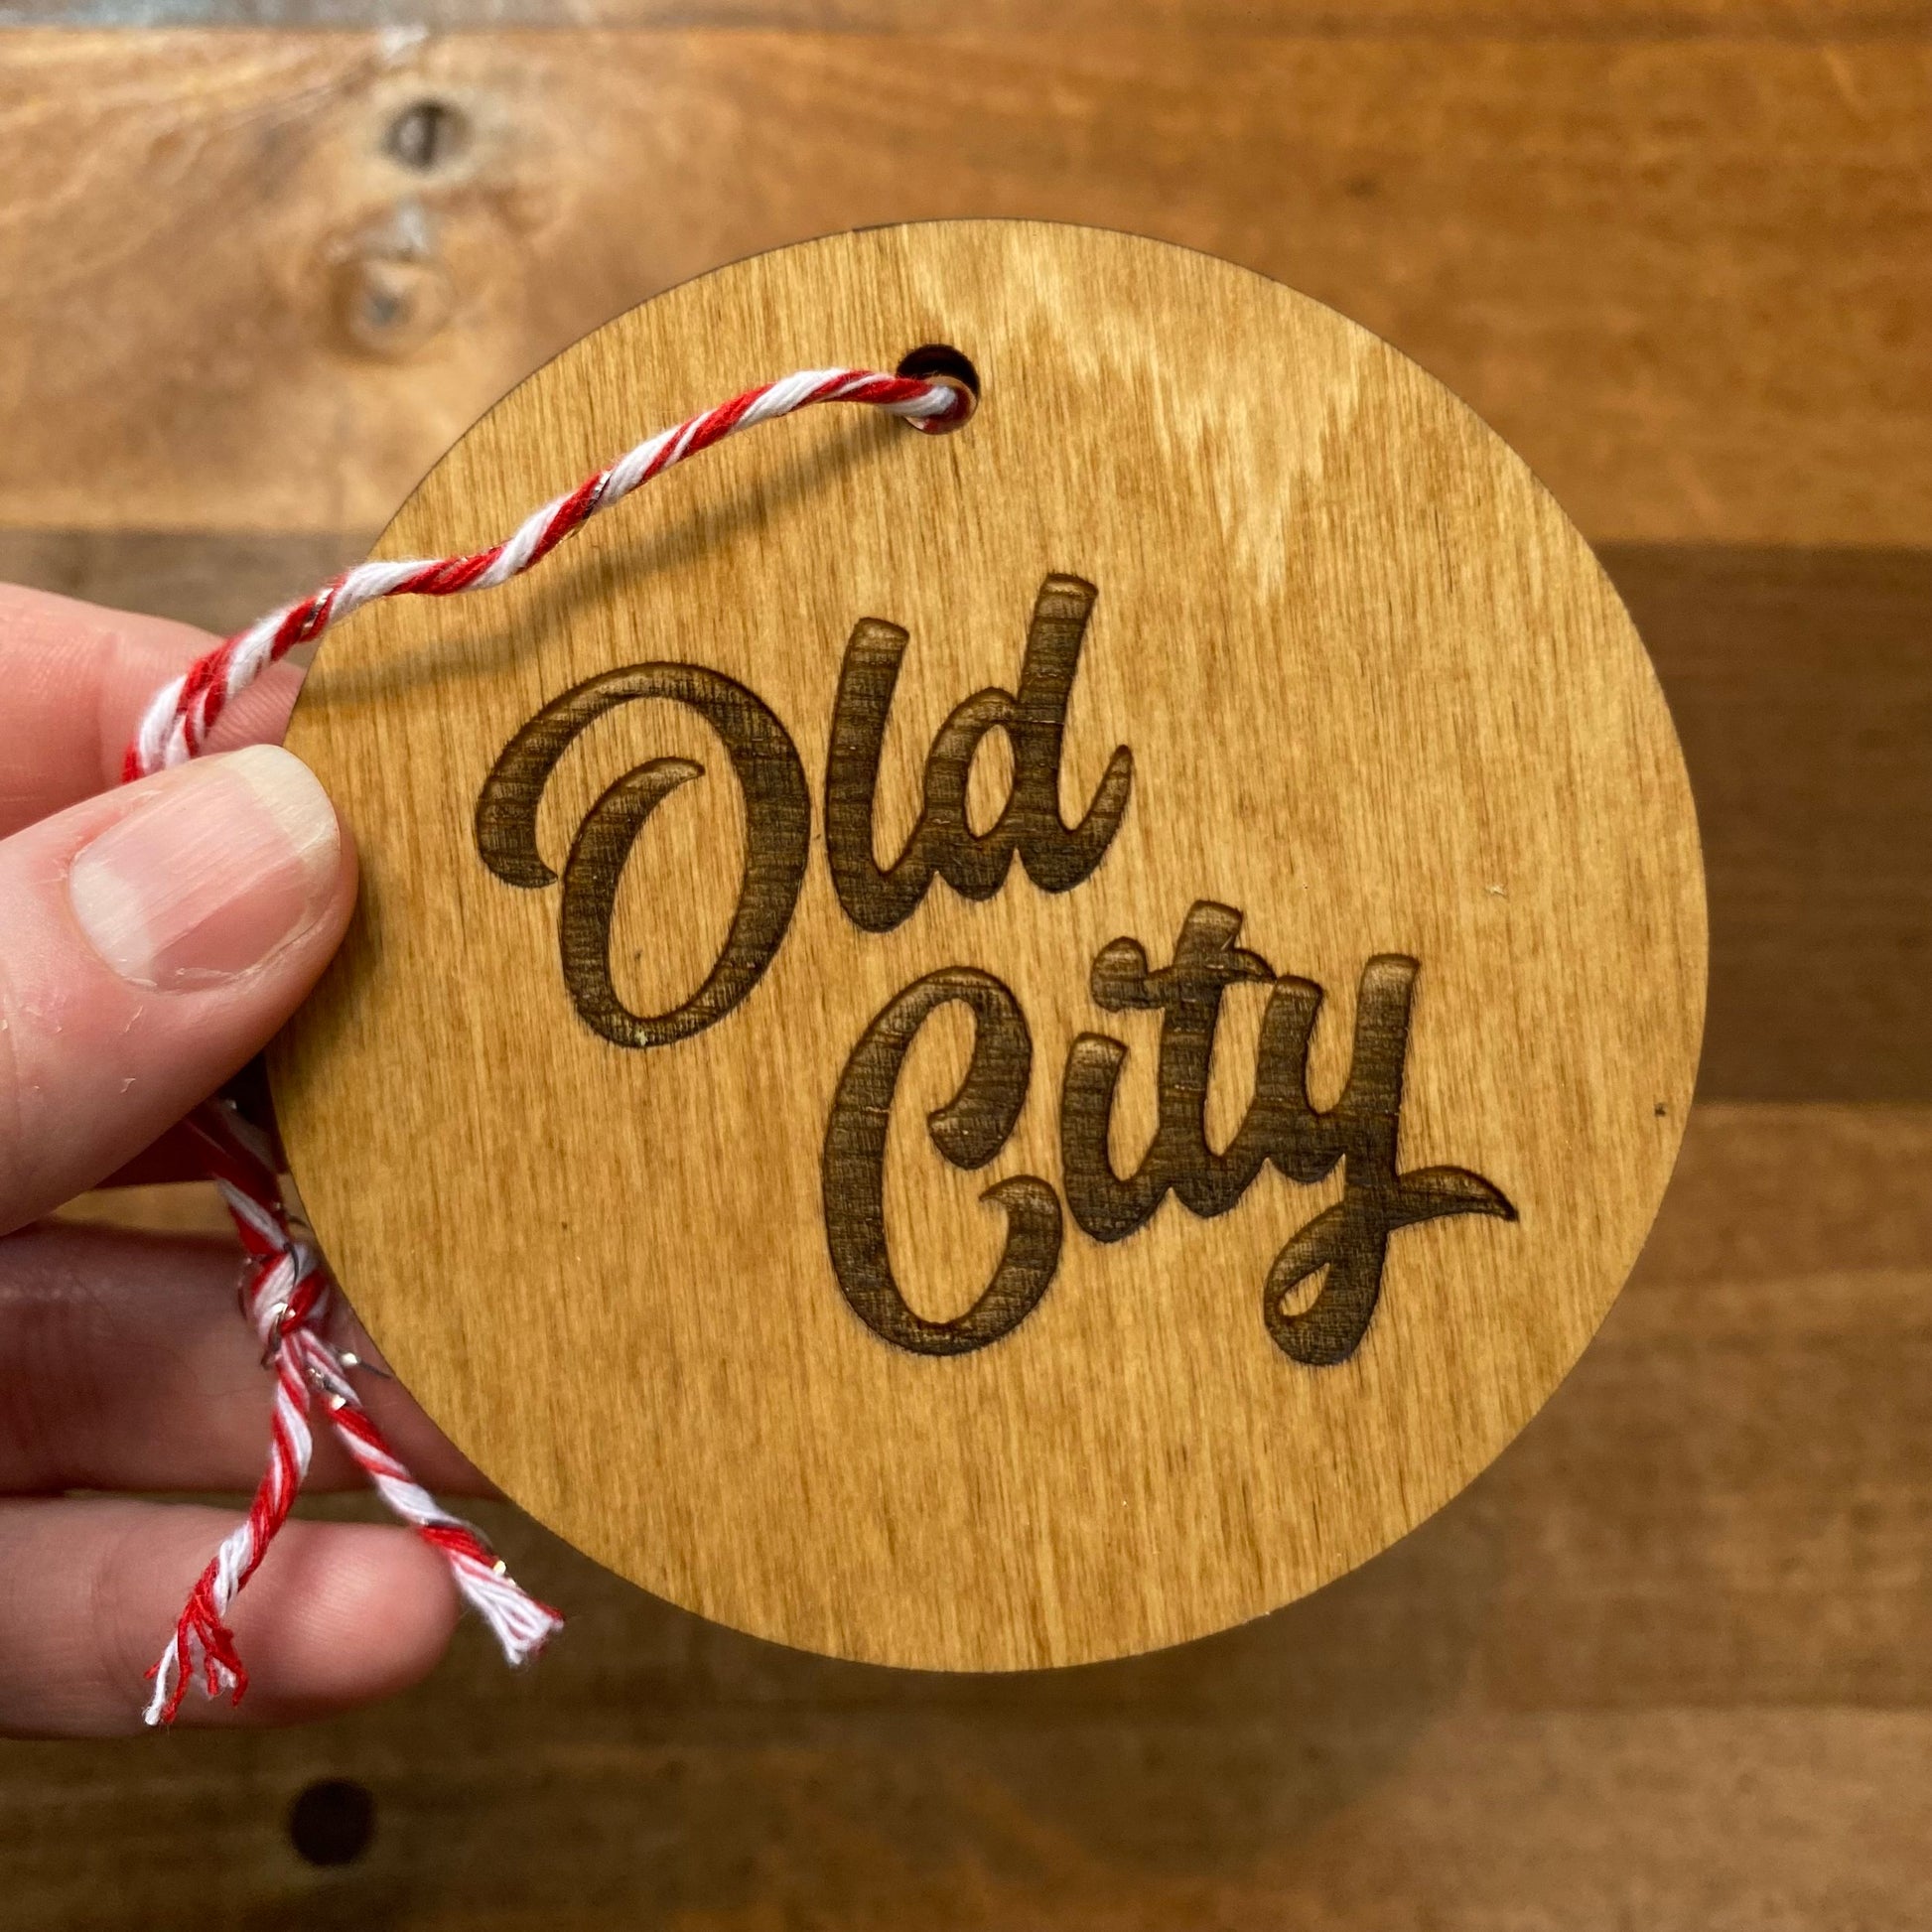 A hand holding a laser-etched Philly Wood Ornament disc with "Old City" engraved on it, attached to a red and white string. (Brand: Frankadelphia)